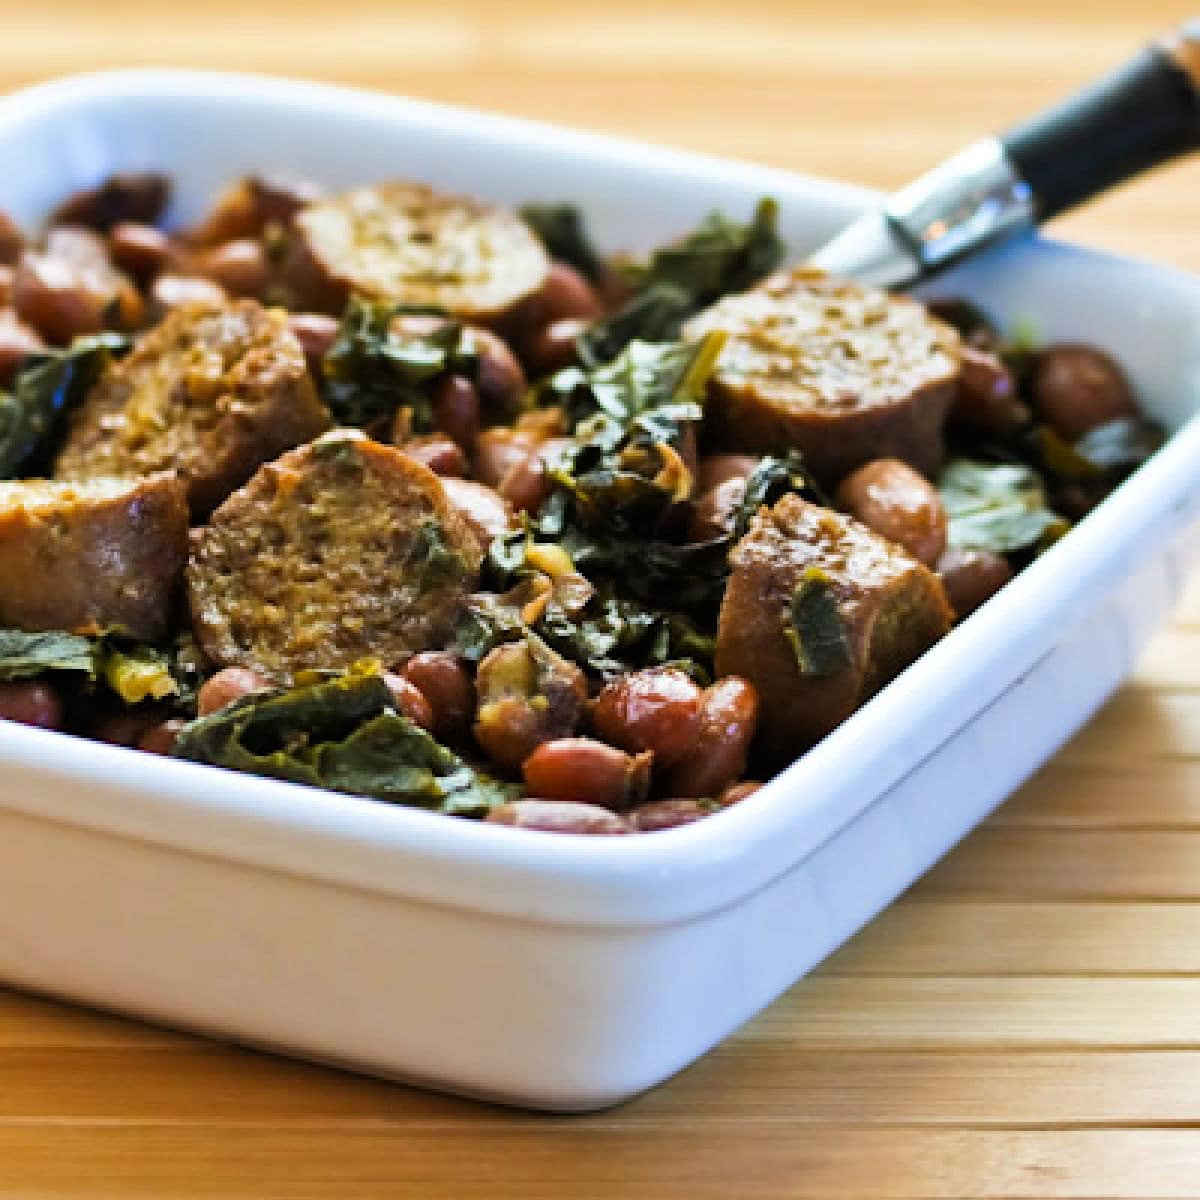 Greens and Beans with Sausage shown in square serving bowl.